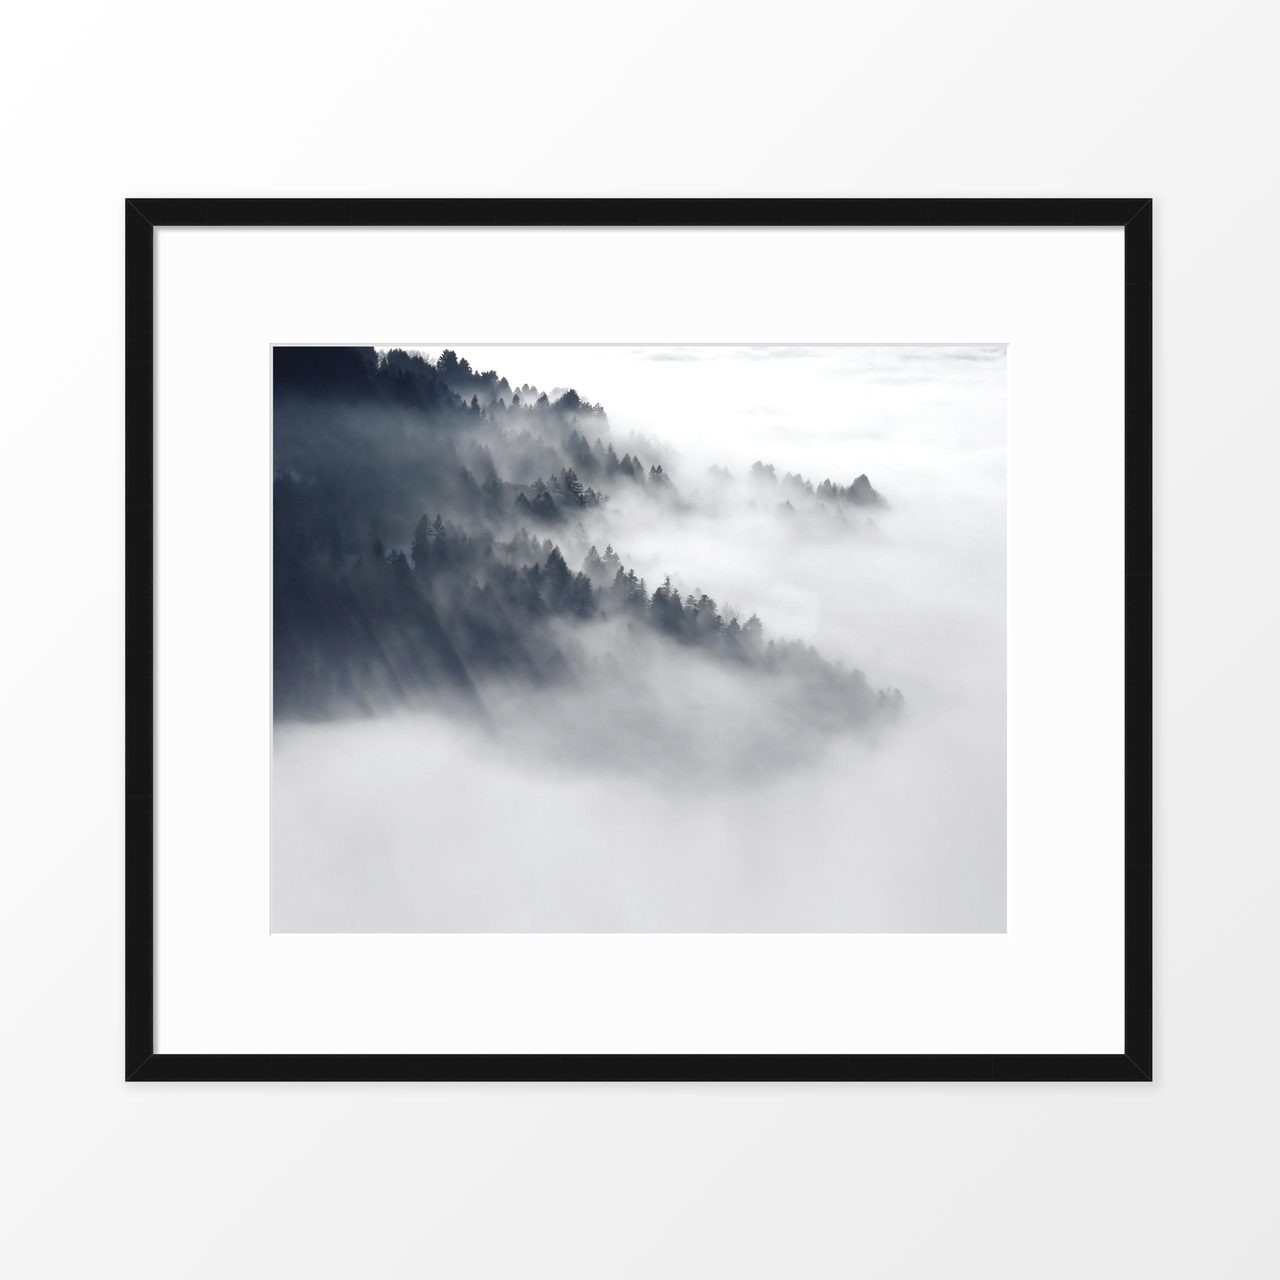 'Forest Mist II' Photography Poster from The Printed Home